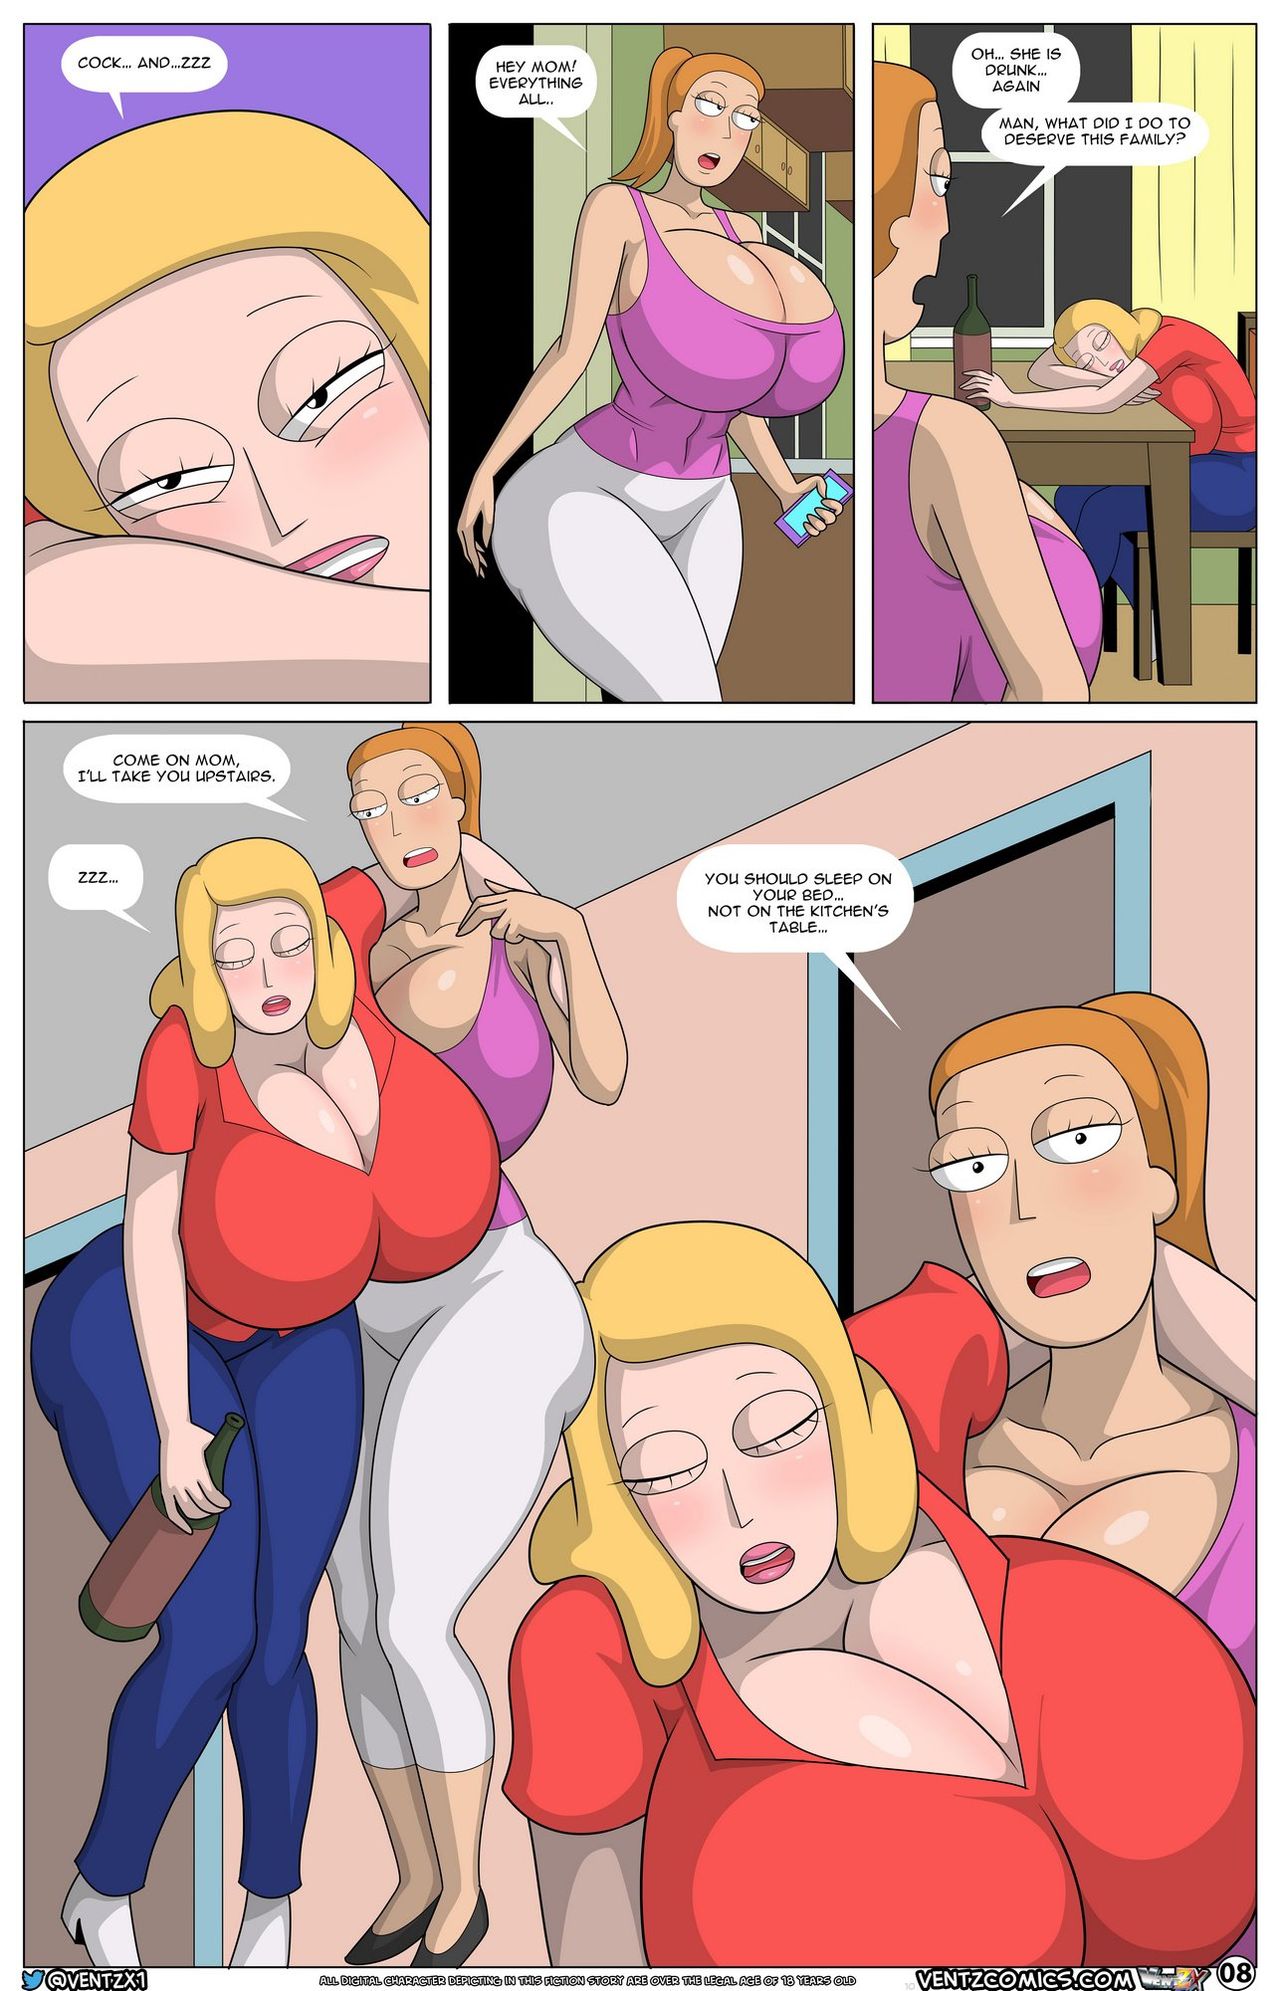 Morty Experiment â€“ Arabatos -ongoing - english - Page 9 - IMHentai